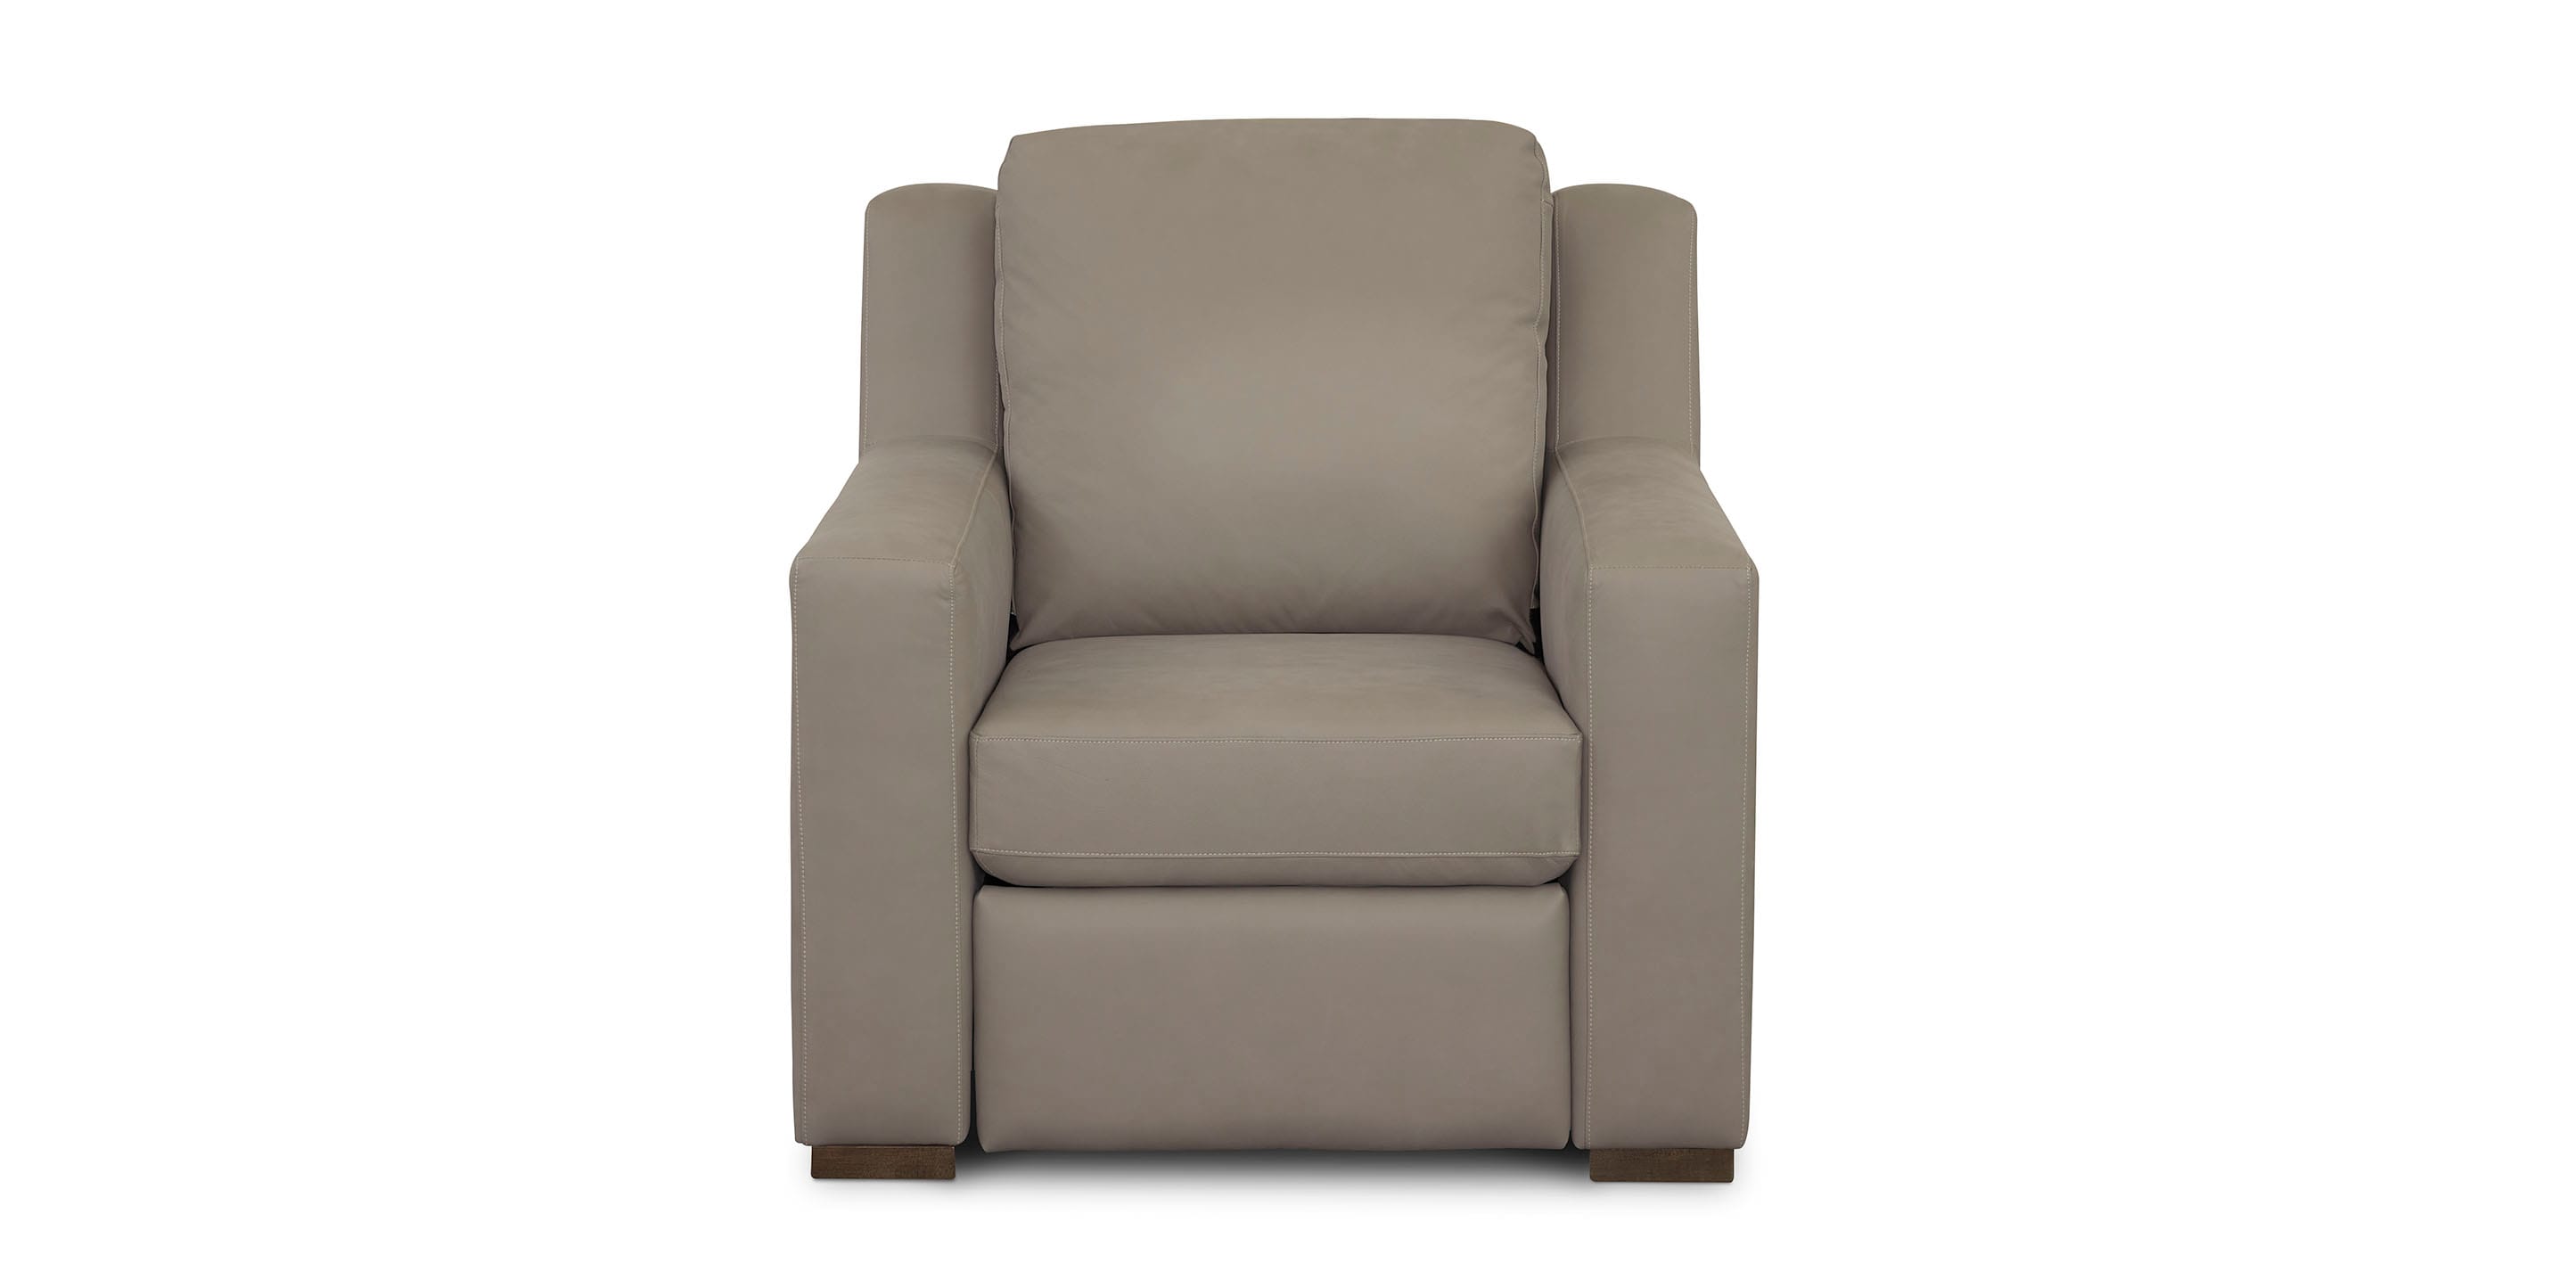 Somers Leather Reclining Chair